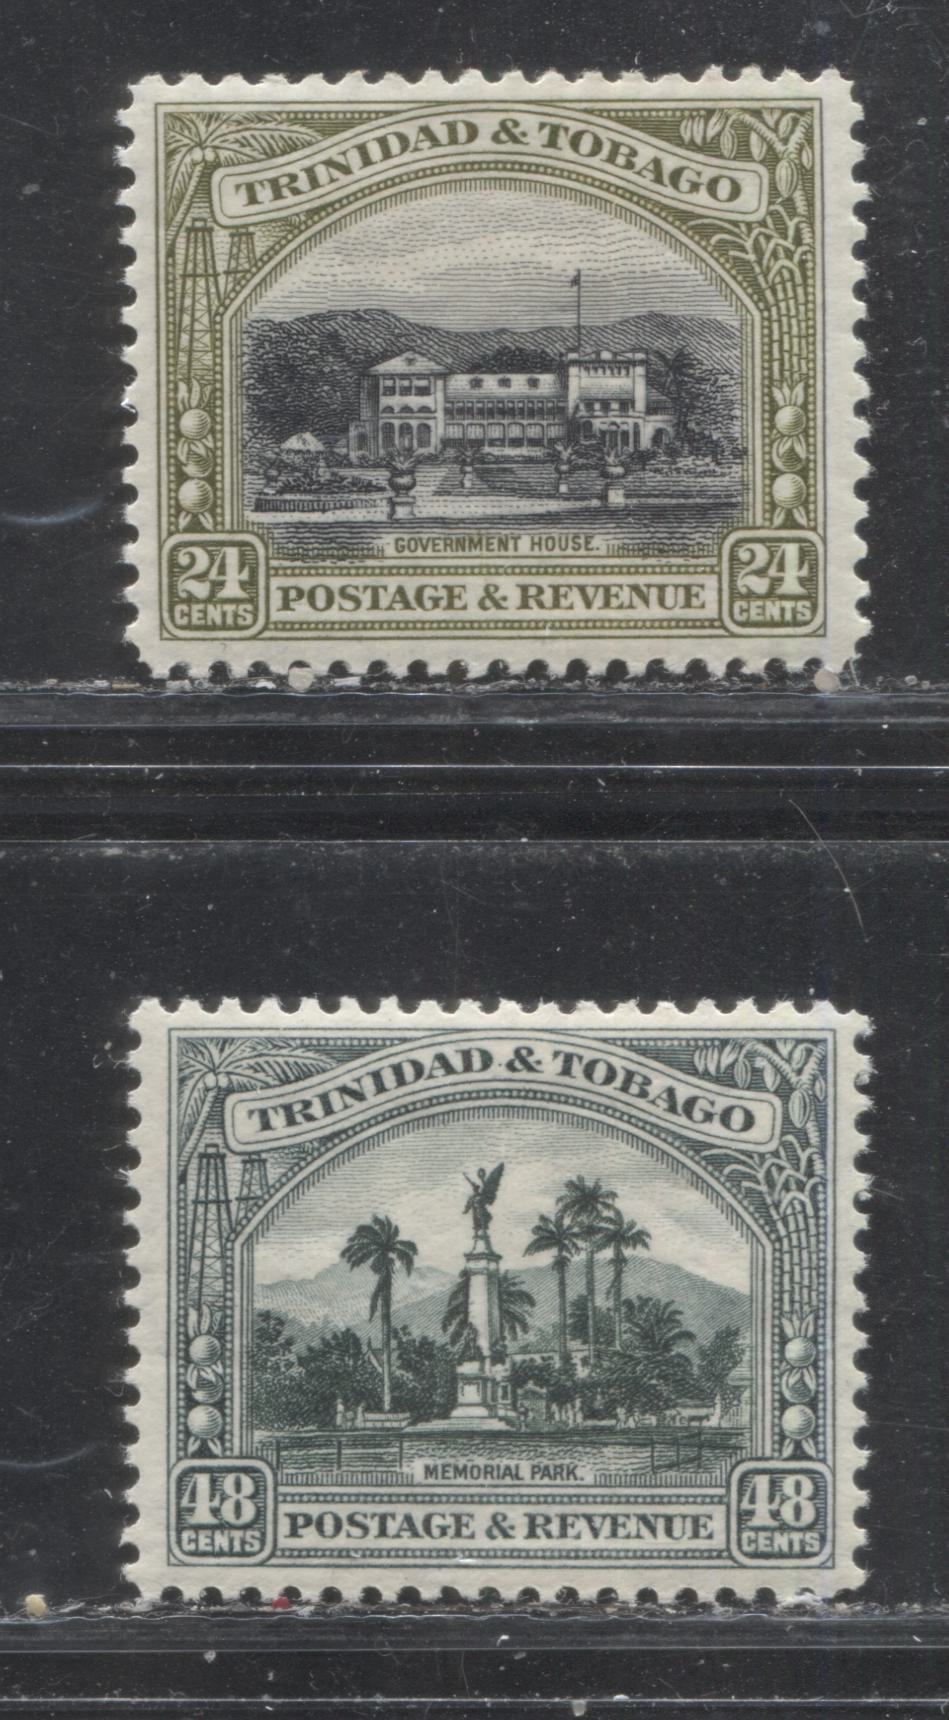 Lot 218 Trinidad & Tobago SG#236-237 24c & 48c Olive Green & Black and Slate Green & Bottle Green Government House & Memorial Park, 1935 Pictorial Definitive Issue, 2 VFOG Singles, Script CA Watermark, Perf. 12